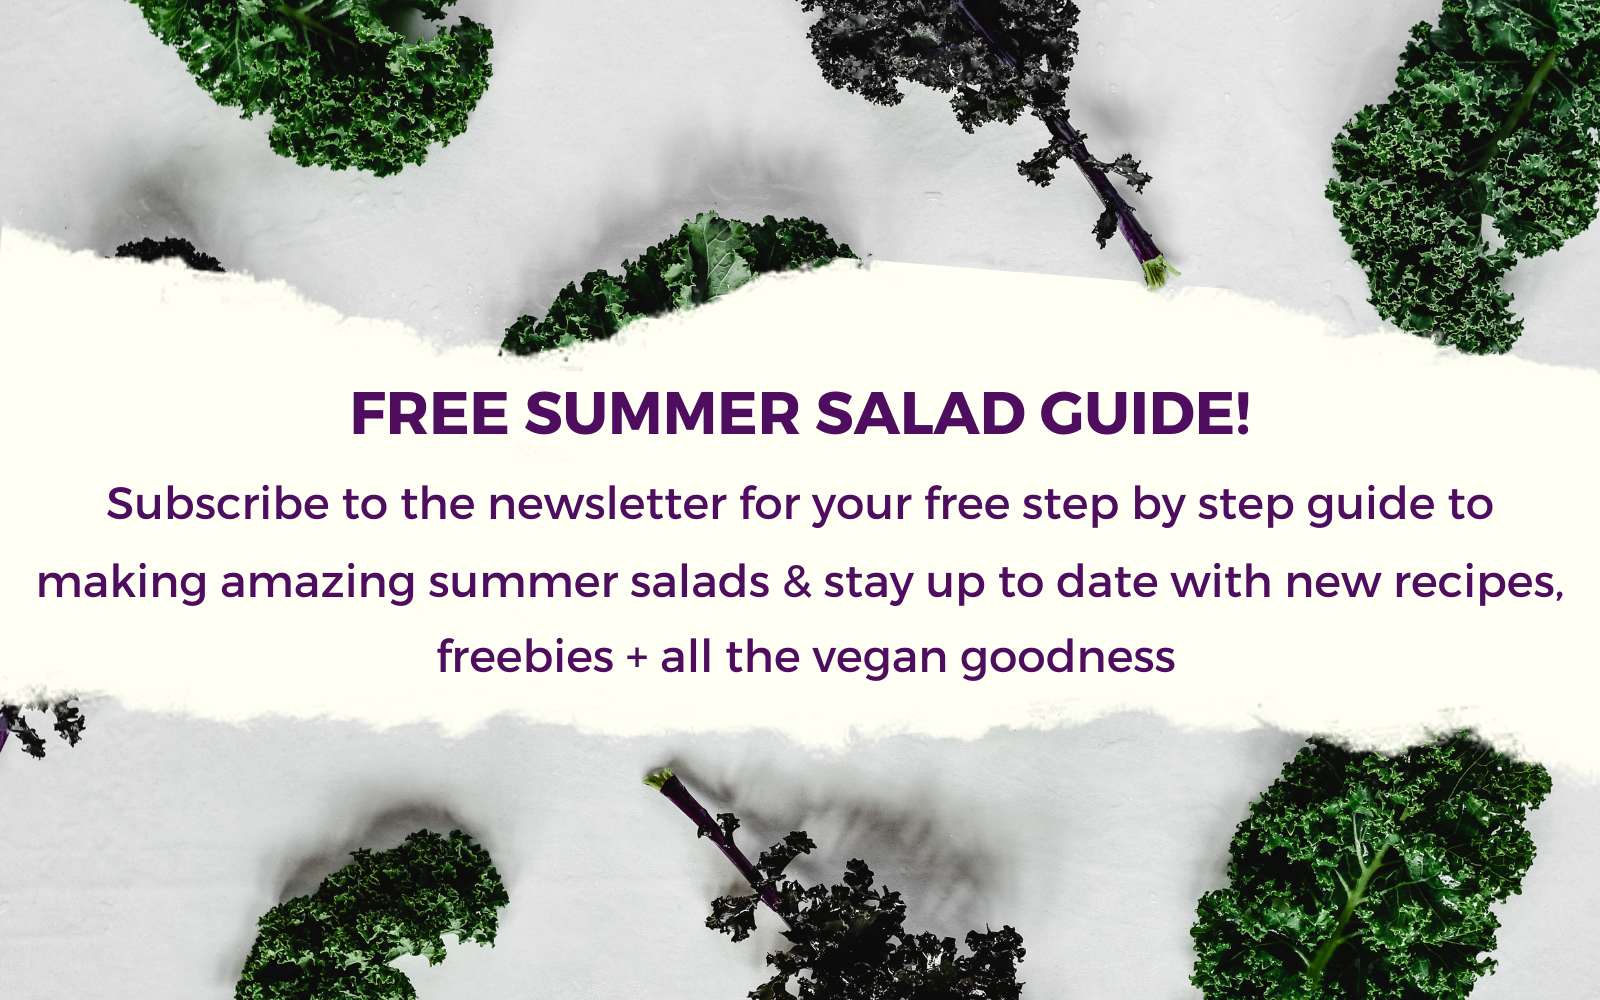 free summer salad guide with newsletter signup image